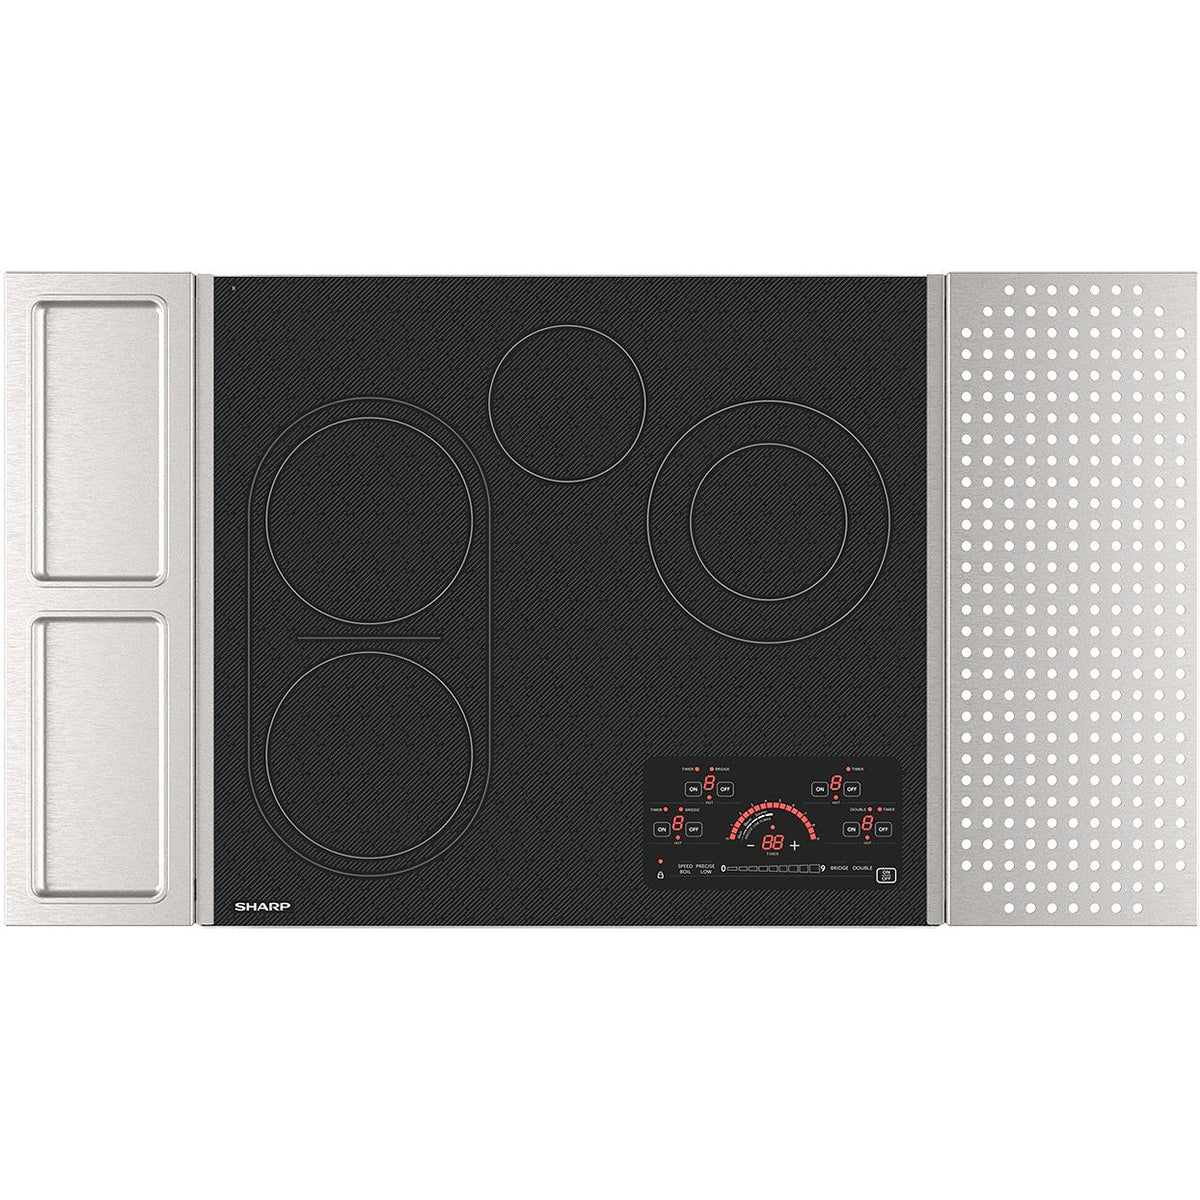 24-inch Built-in Electric Cooktop SCR2442FB IMAGE 1